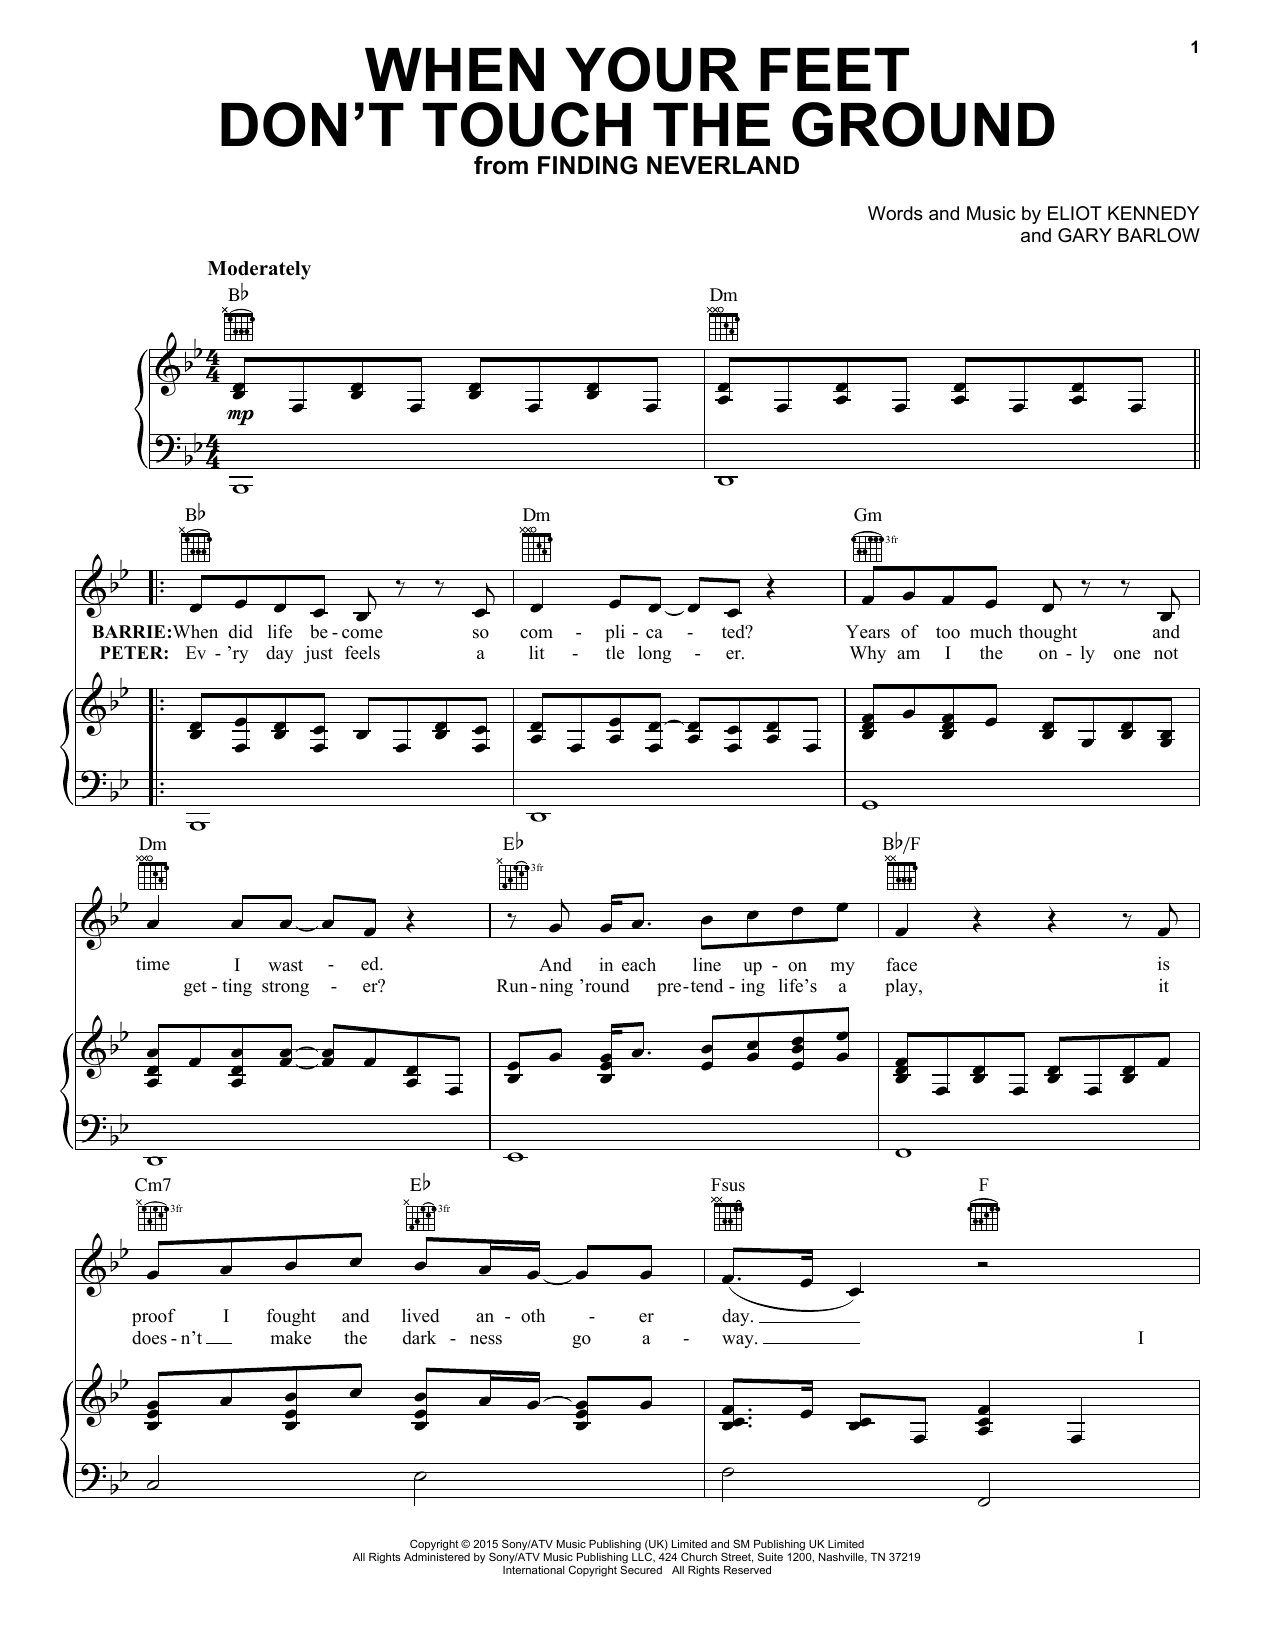 Download Eliot Kennedy When Your Feet Don't Touch The Ground Sheet Music